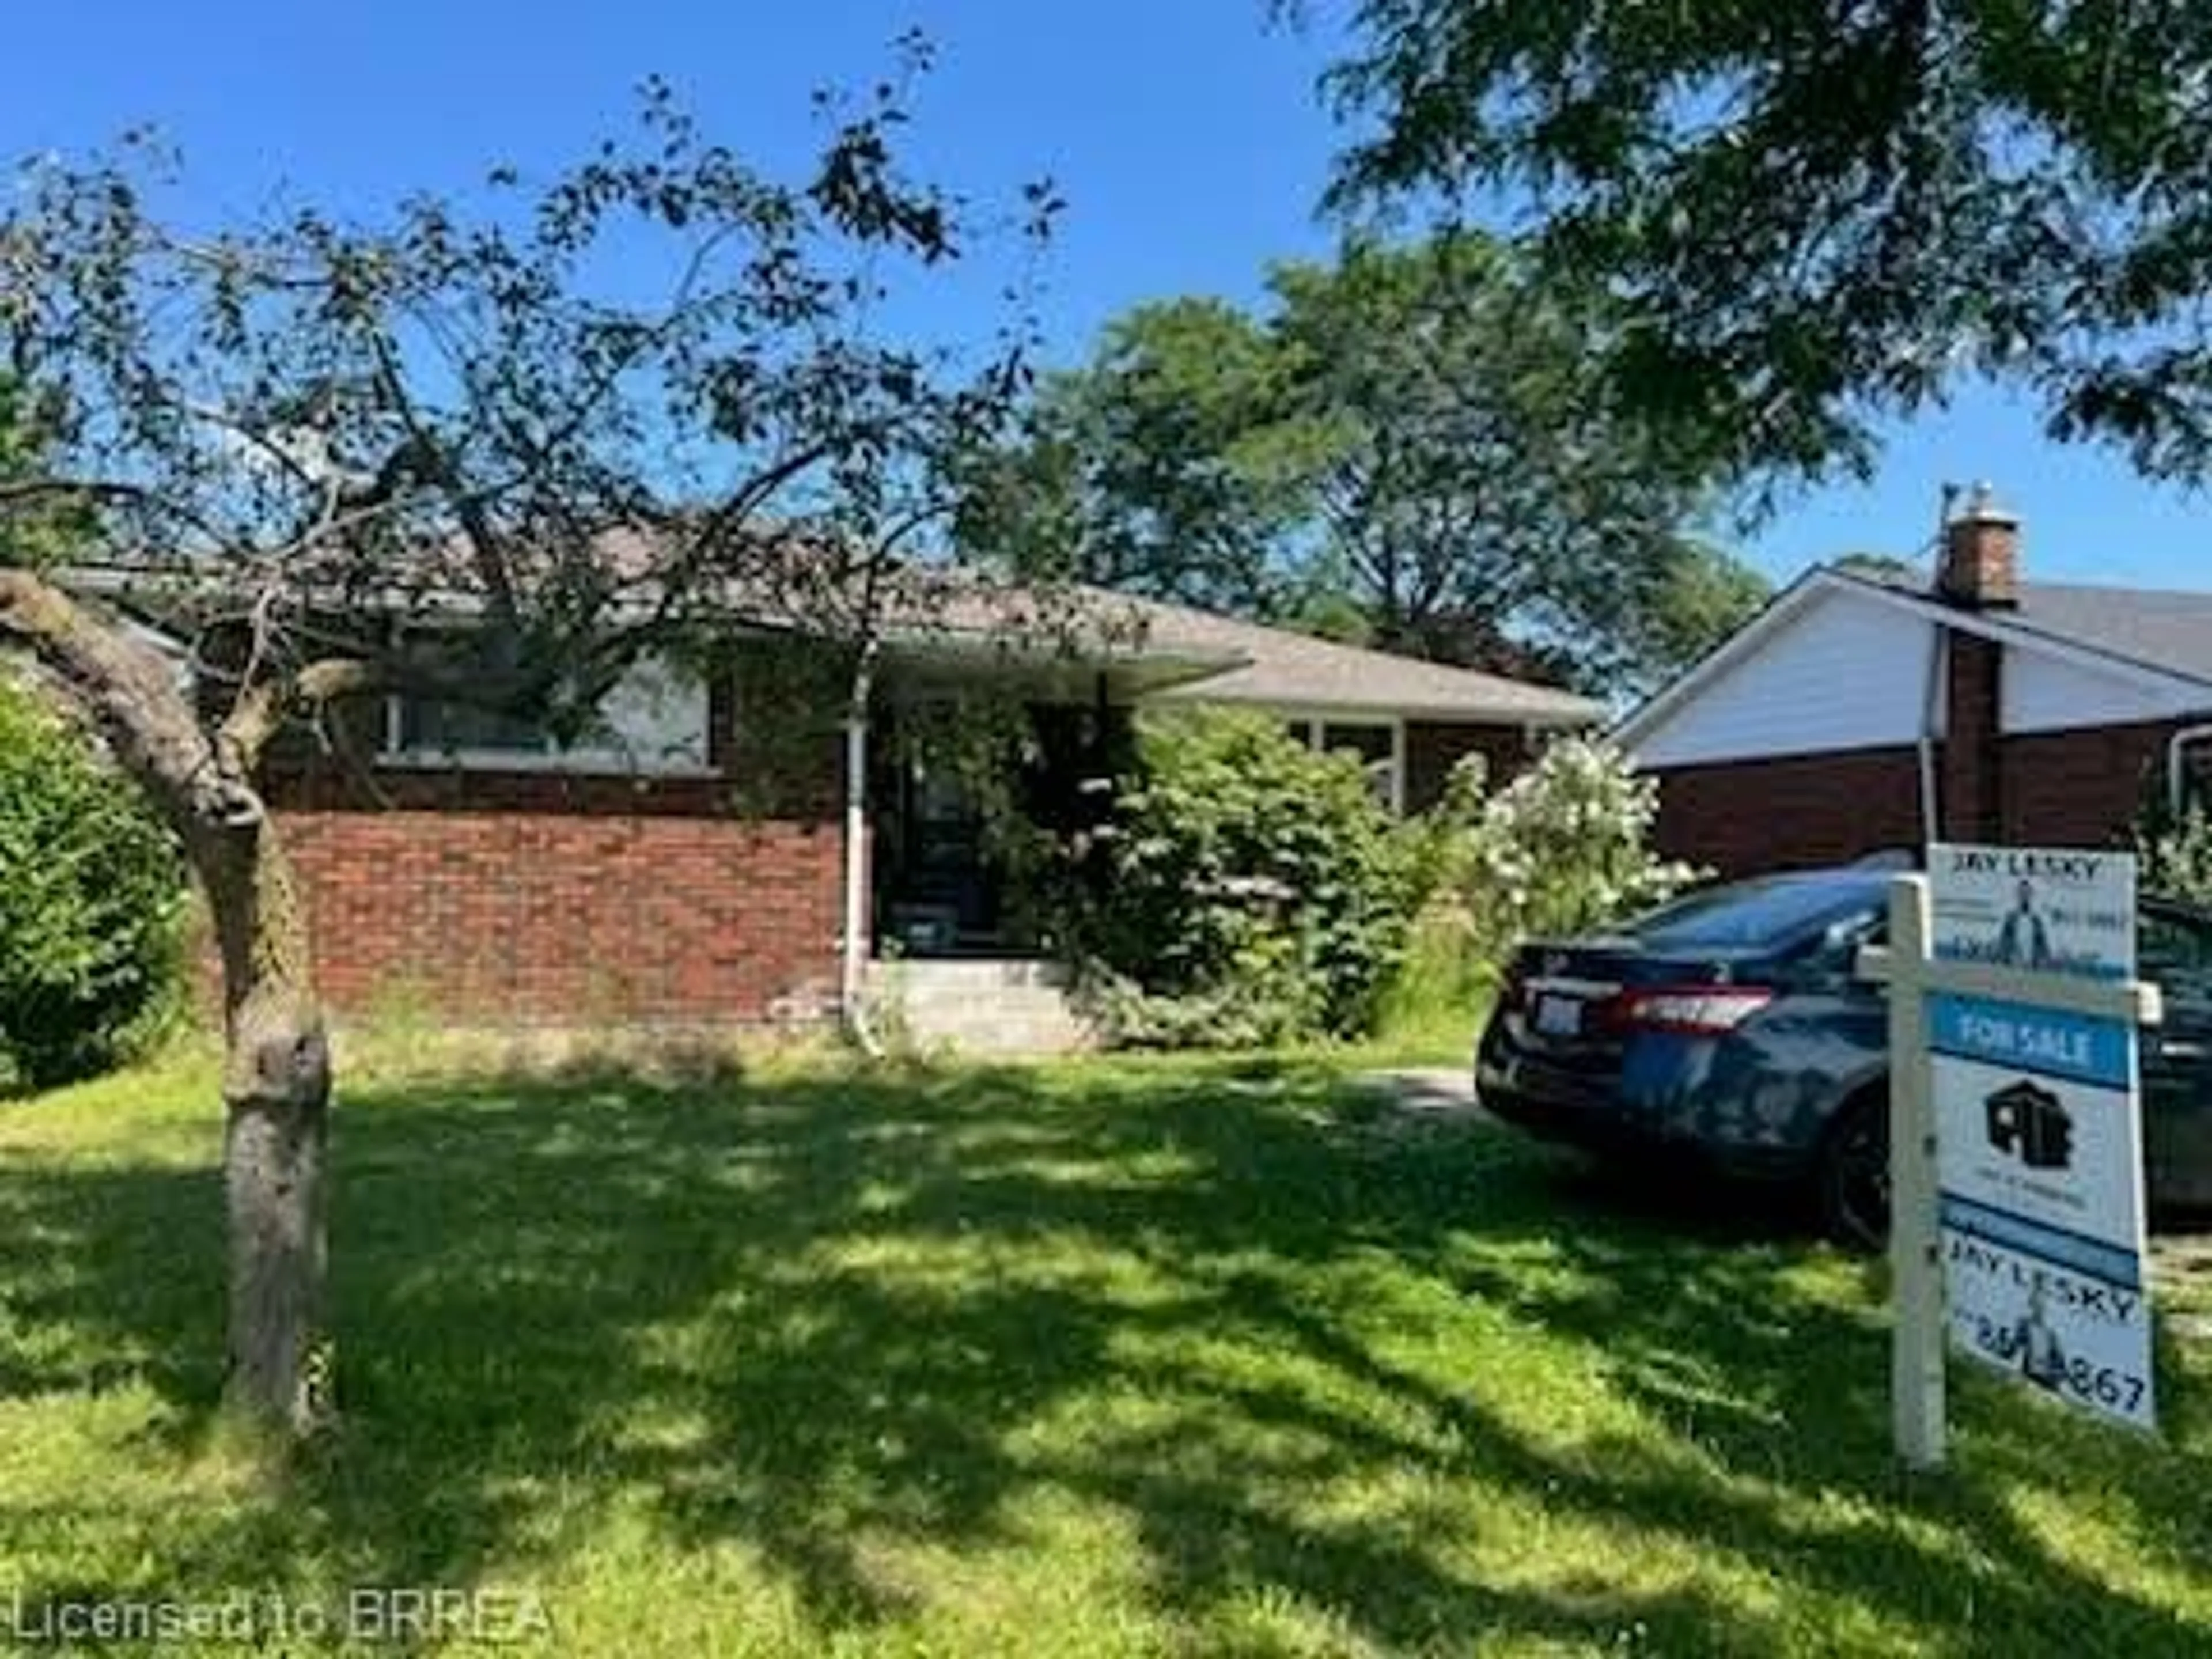 Frontside or backside of a home for 95 Fairview Dr, Brantford Ontario N3R 2X1